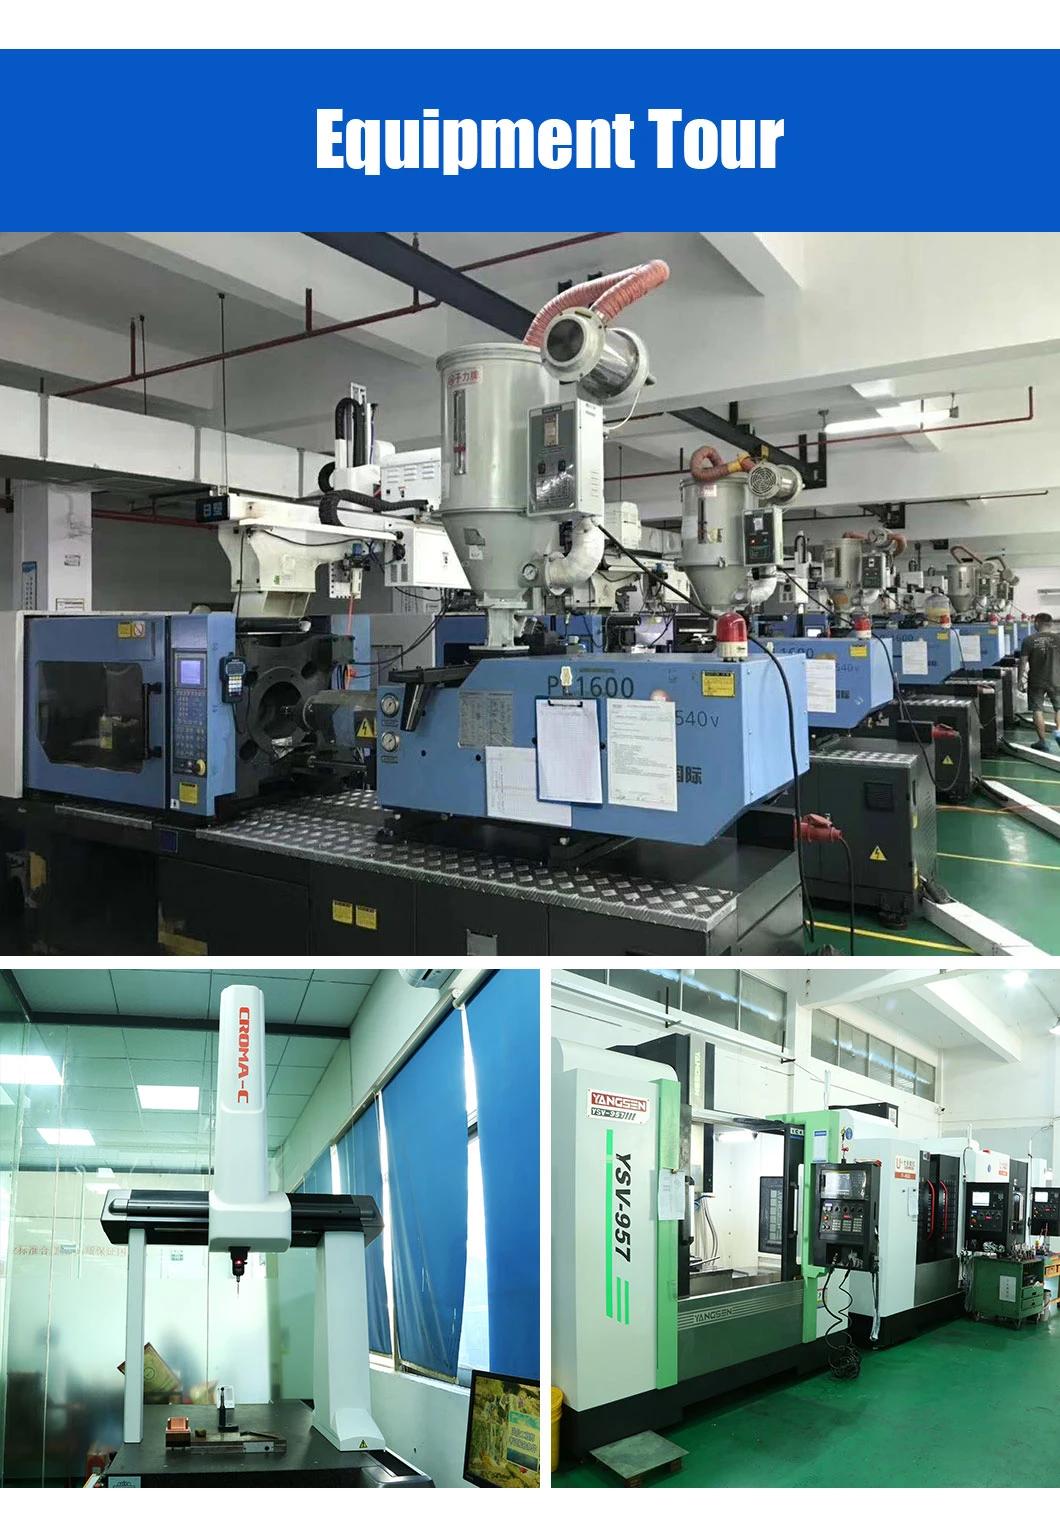 Car Accessories/Auto Parts/Overmolding/Injection Mould/Customized Plastic Injection Mould Factory Vendor/Manufacturer/OEM